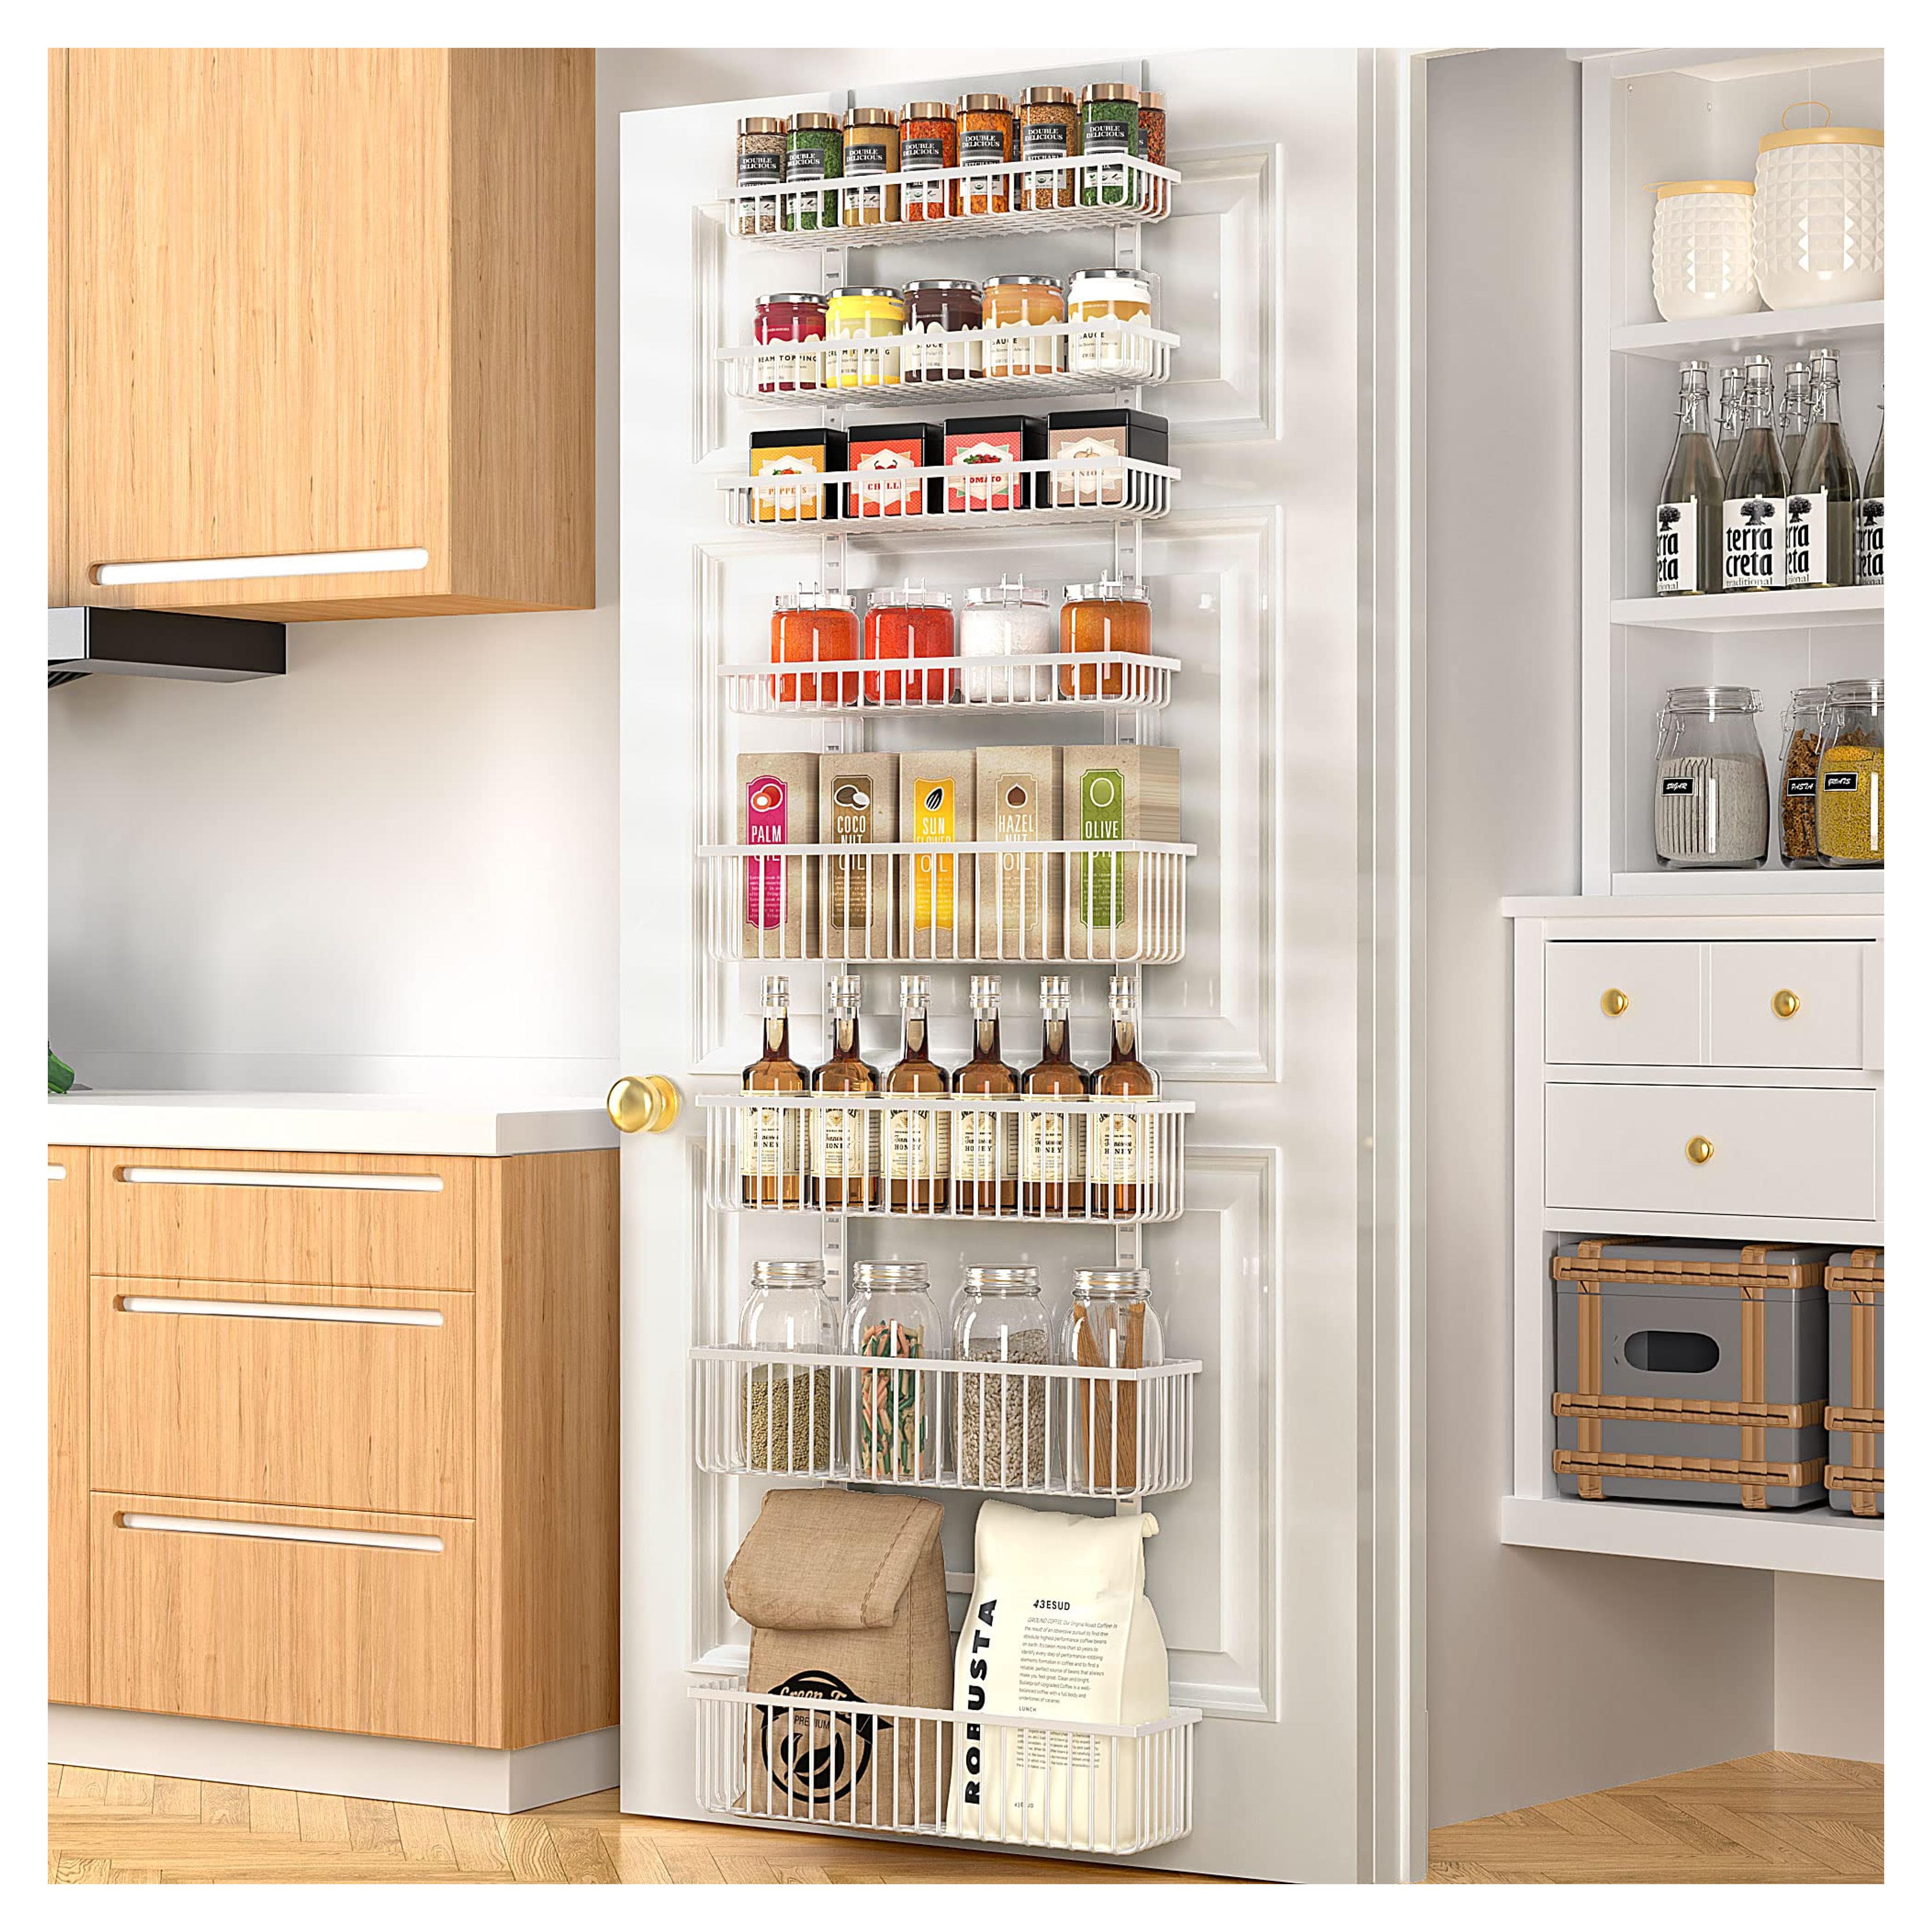 Amazon.com: Moforoco 8-Tier Over The Door Pantry Organizer, Pantry Organization and Storage, Black Hanging Basket Wall Spice Rack Seasoning Shelves, Home & Kitchen Laundry Room Bathroom Essentials accessories : Home & Kitchen